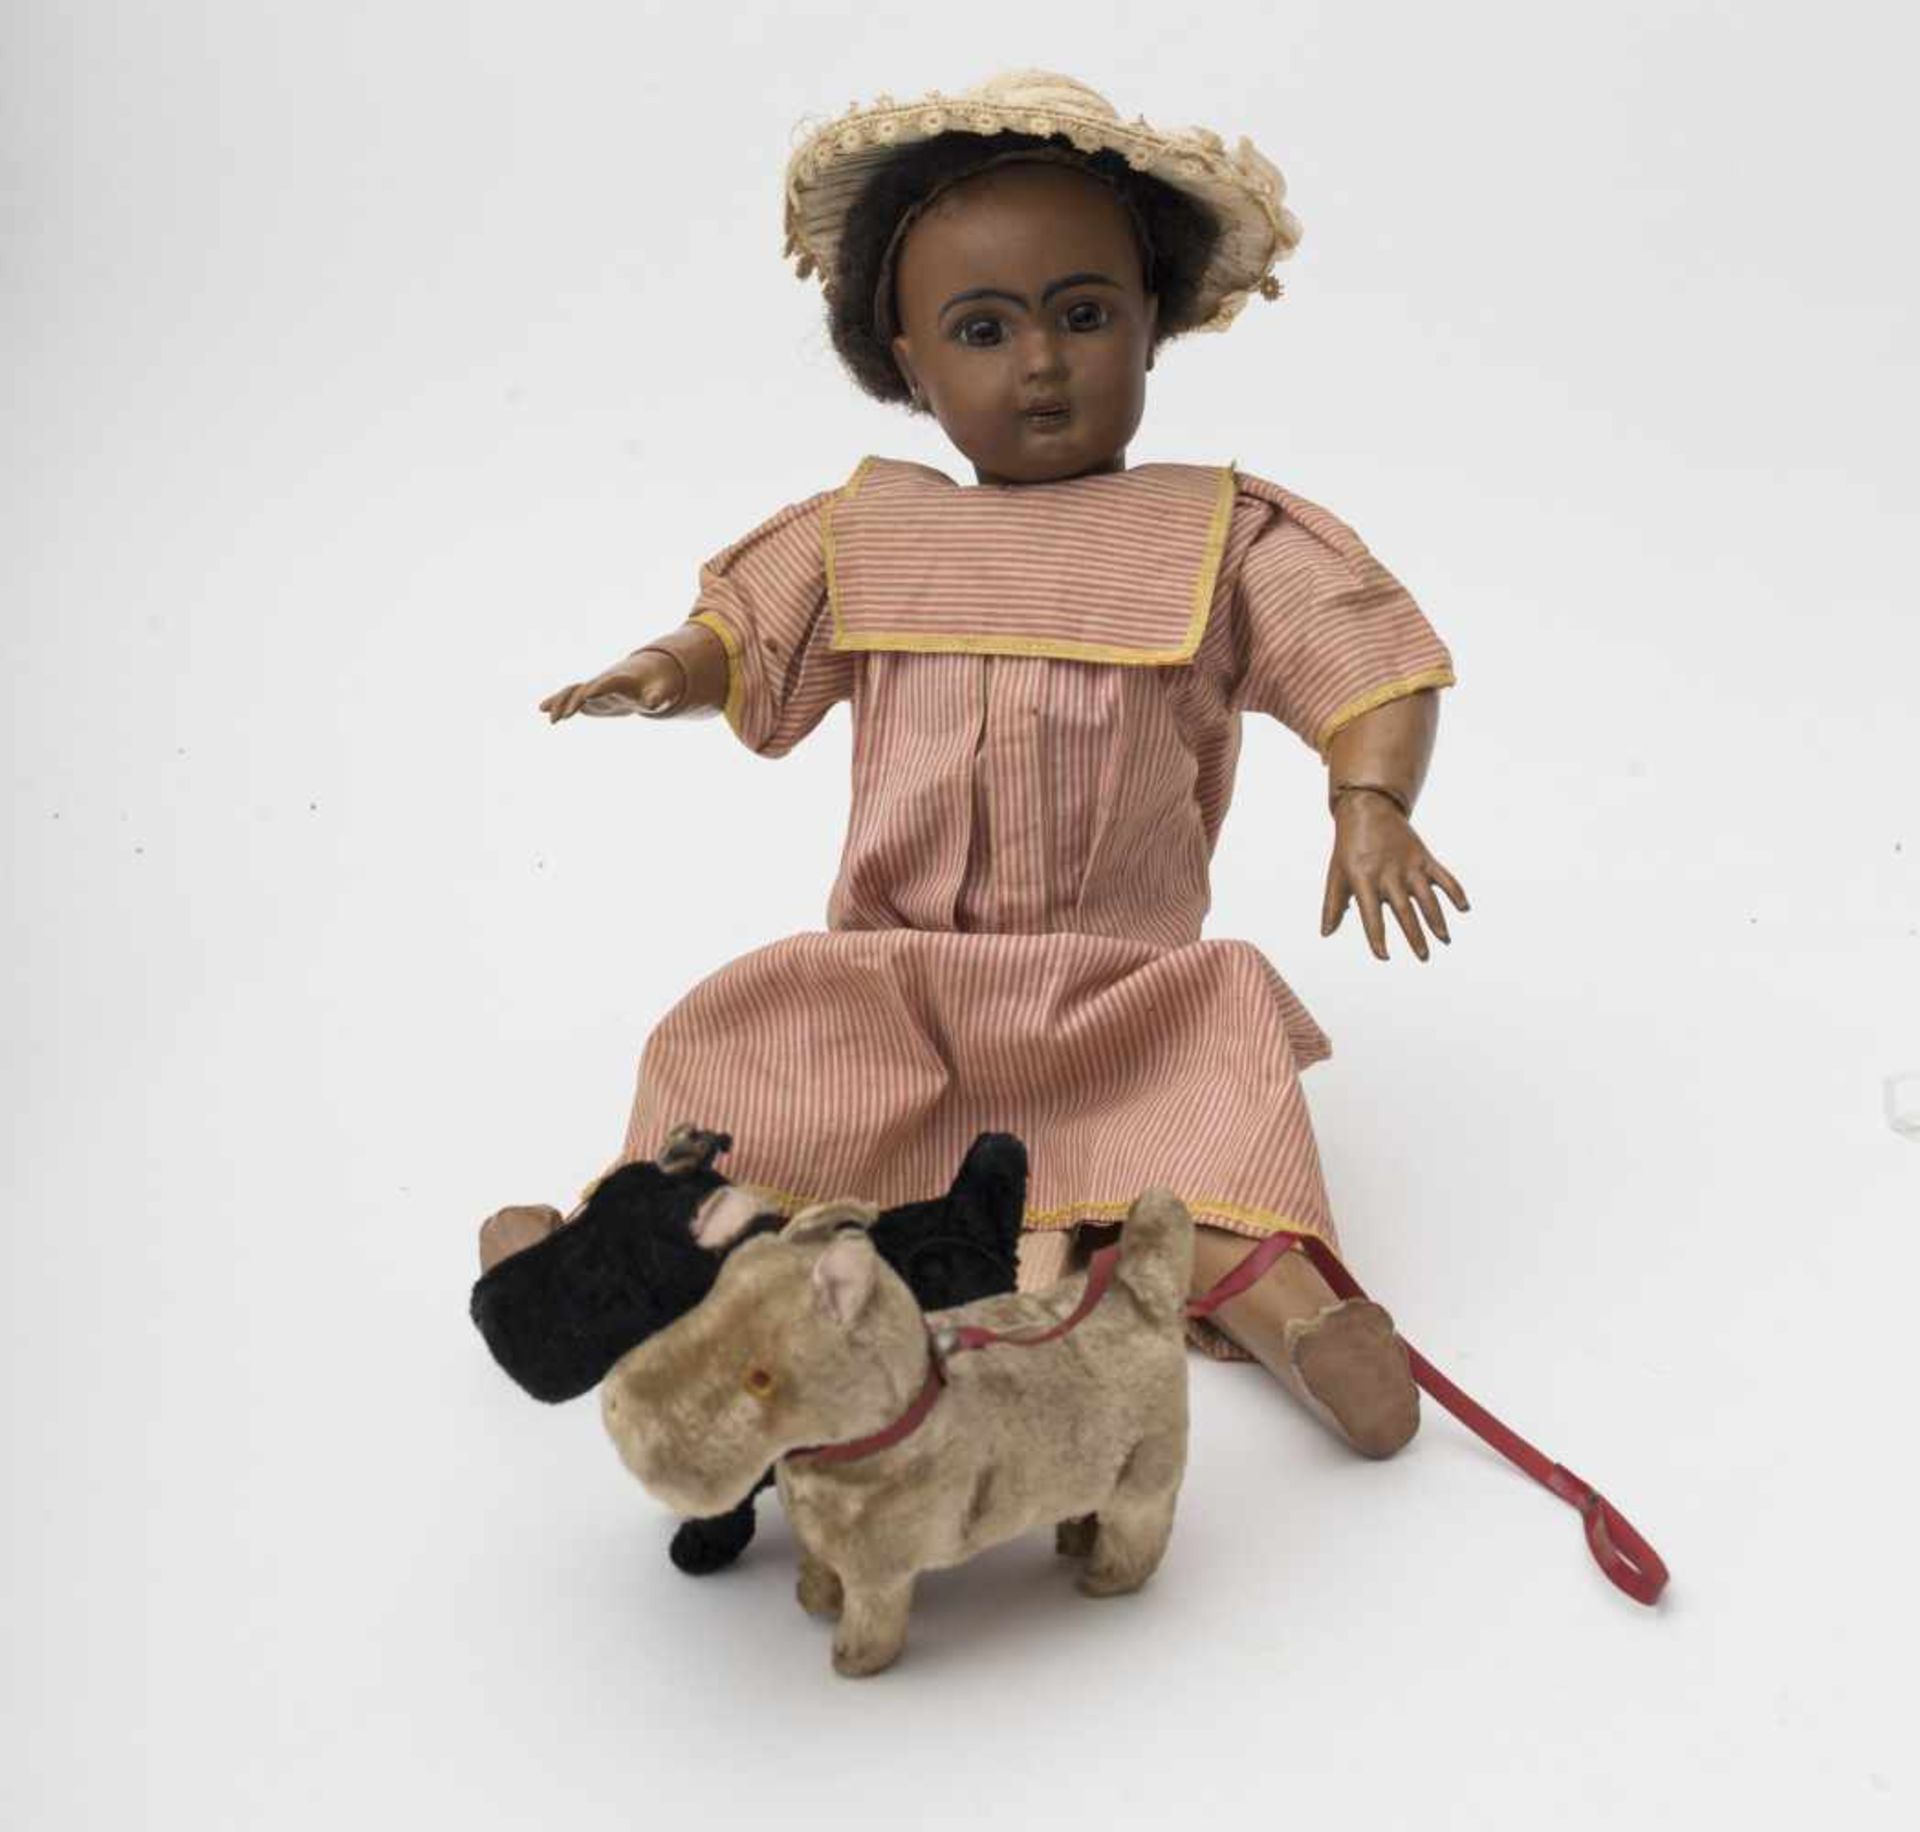 Mixed race STEINER baby With cast biscuit head, open mouth, branded “A 9 – 10 PARIS”, fixed brown